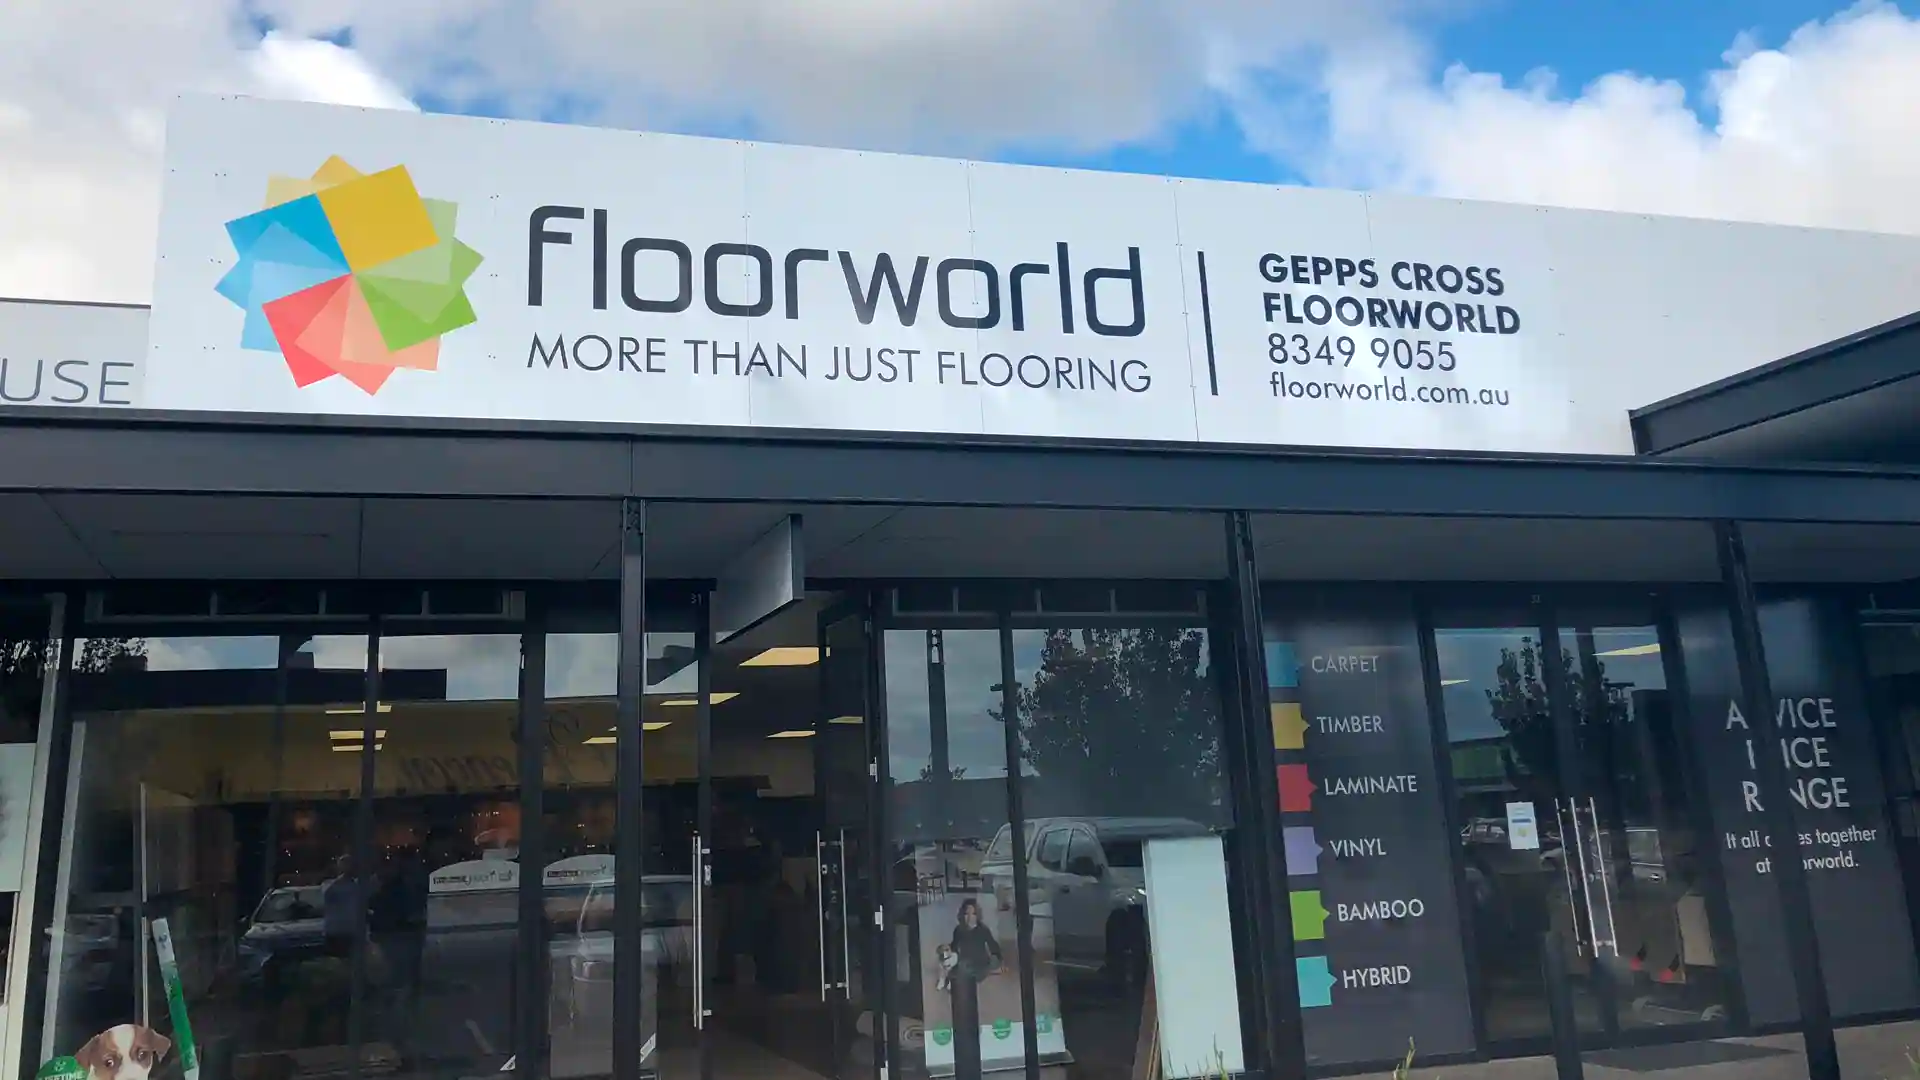 ABOUT ADELAIDE FLOORWORLD